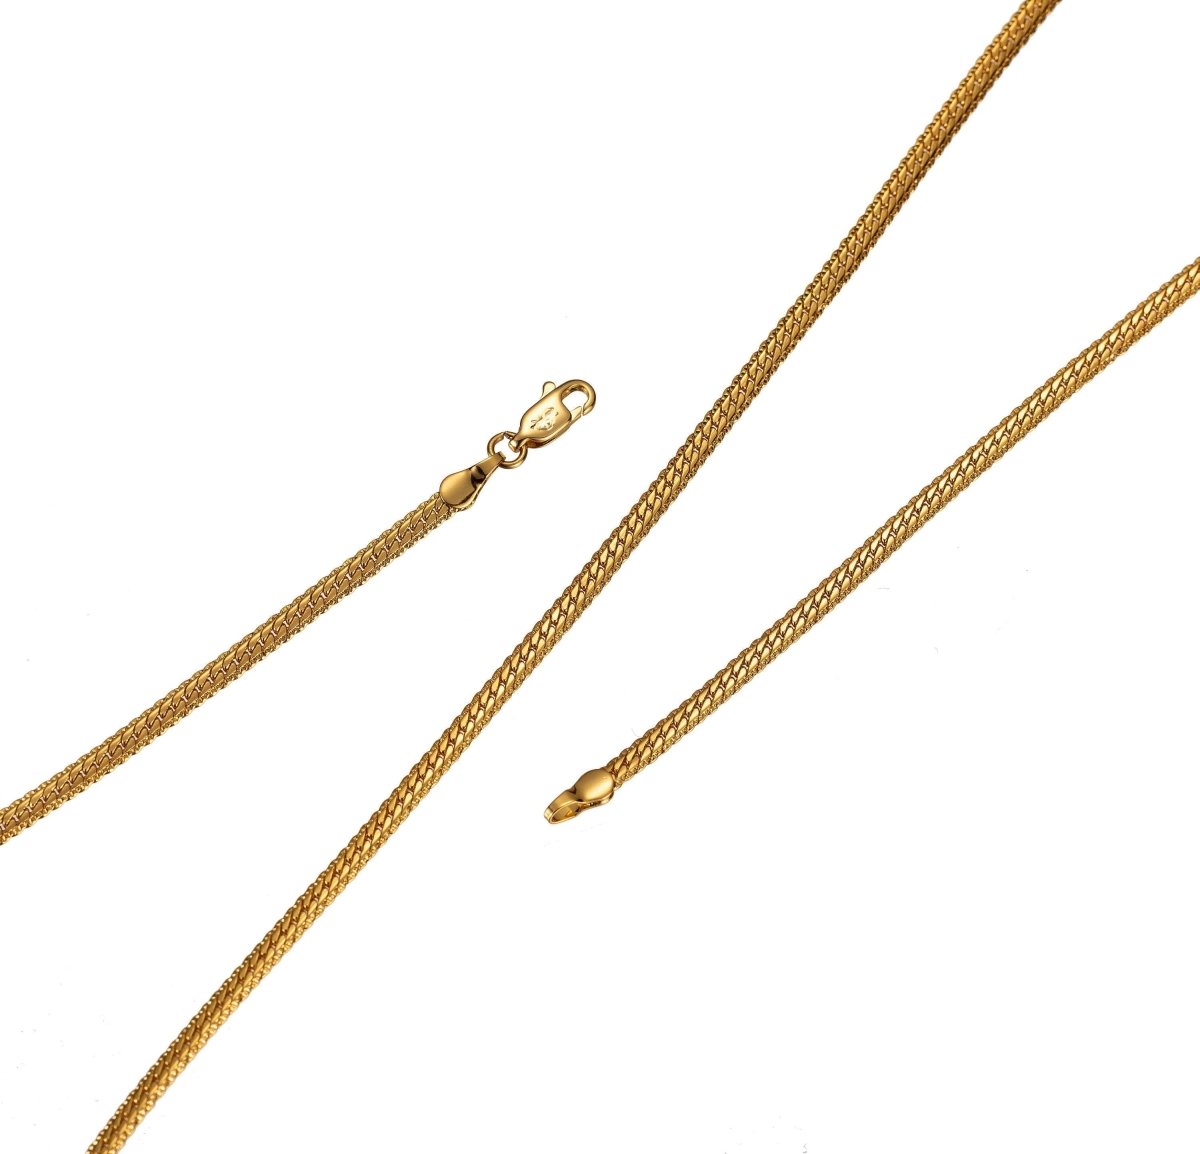 BLOWOUT 24K Gold Filled Herringbone Necklace, 2.3mm in Width, 23.5 Inches w/ Lobster Clasps | CN-418 Clearance Pricing - DLUXCA